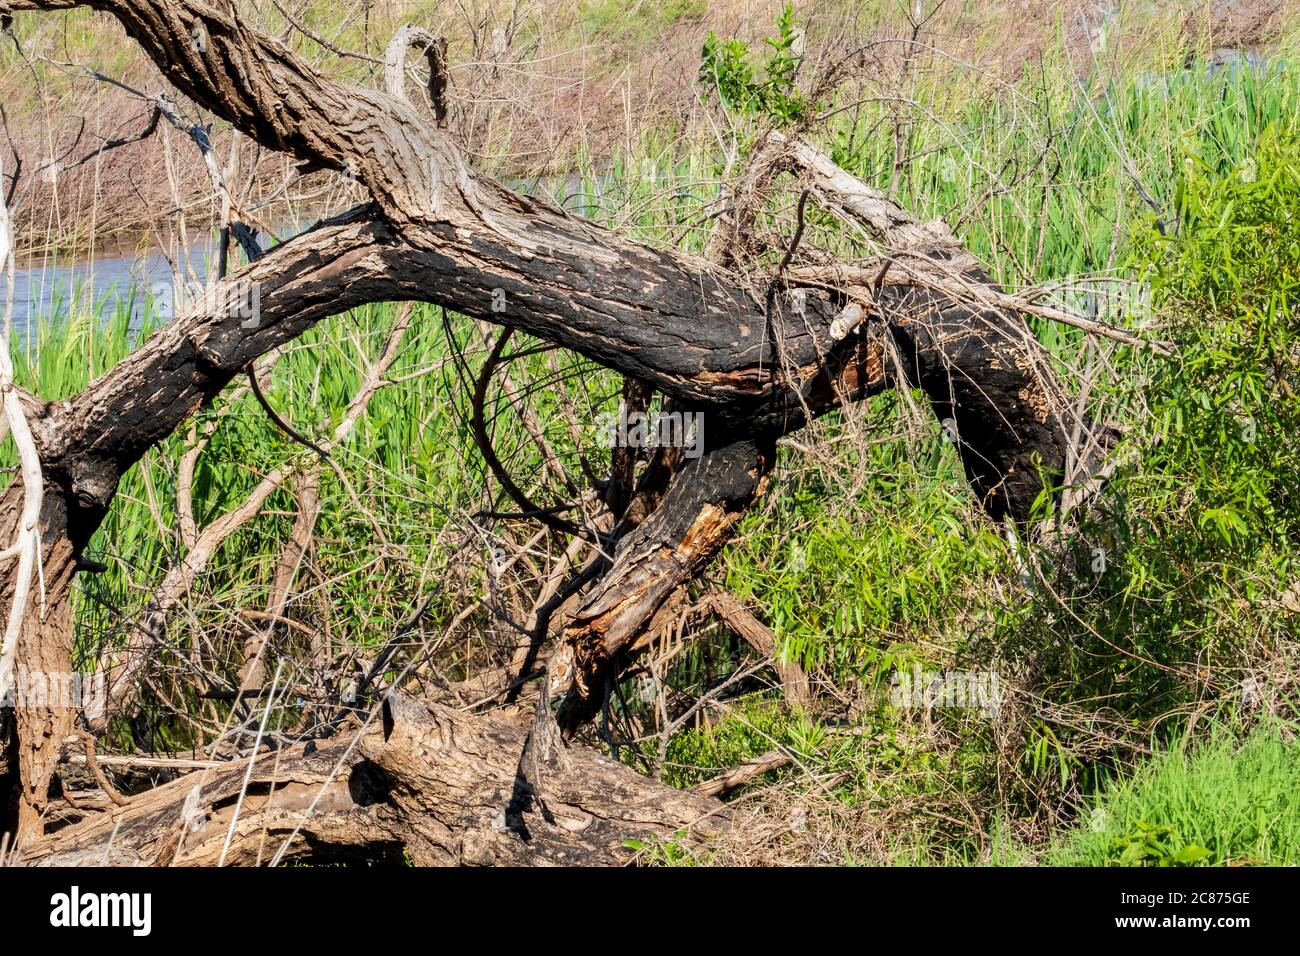 An old Eastern cottonwood tree, Populus deltoides, felled and charred by lightning. Oklahoma, USA. Stock Photo